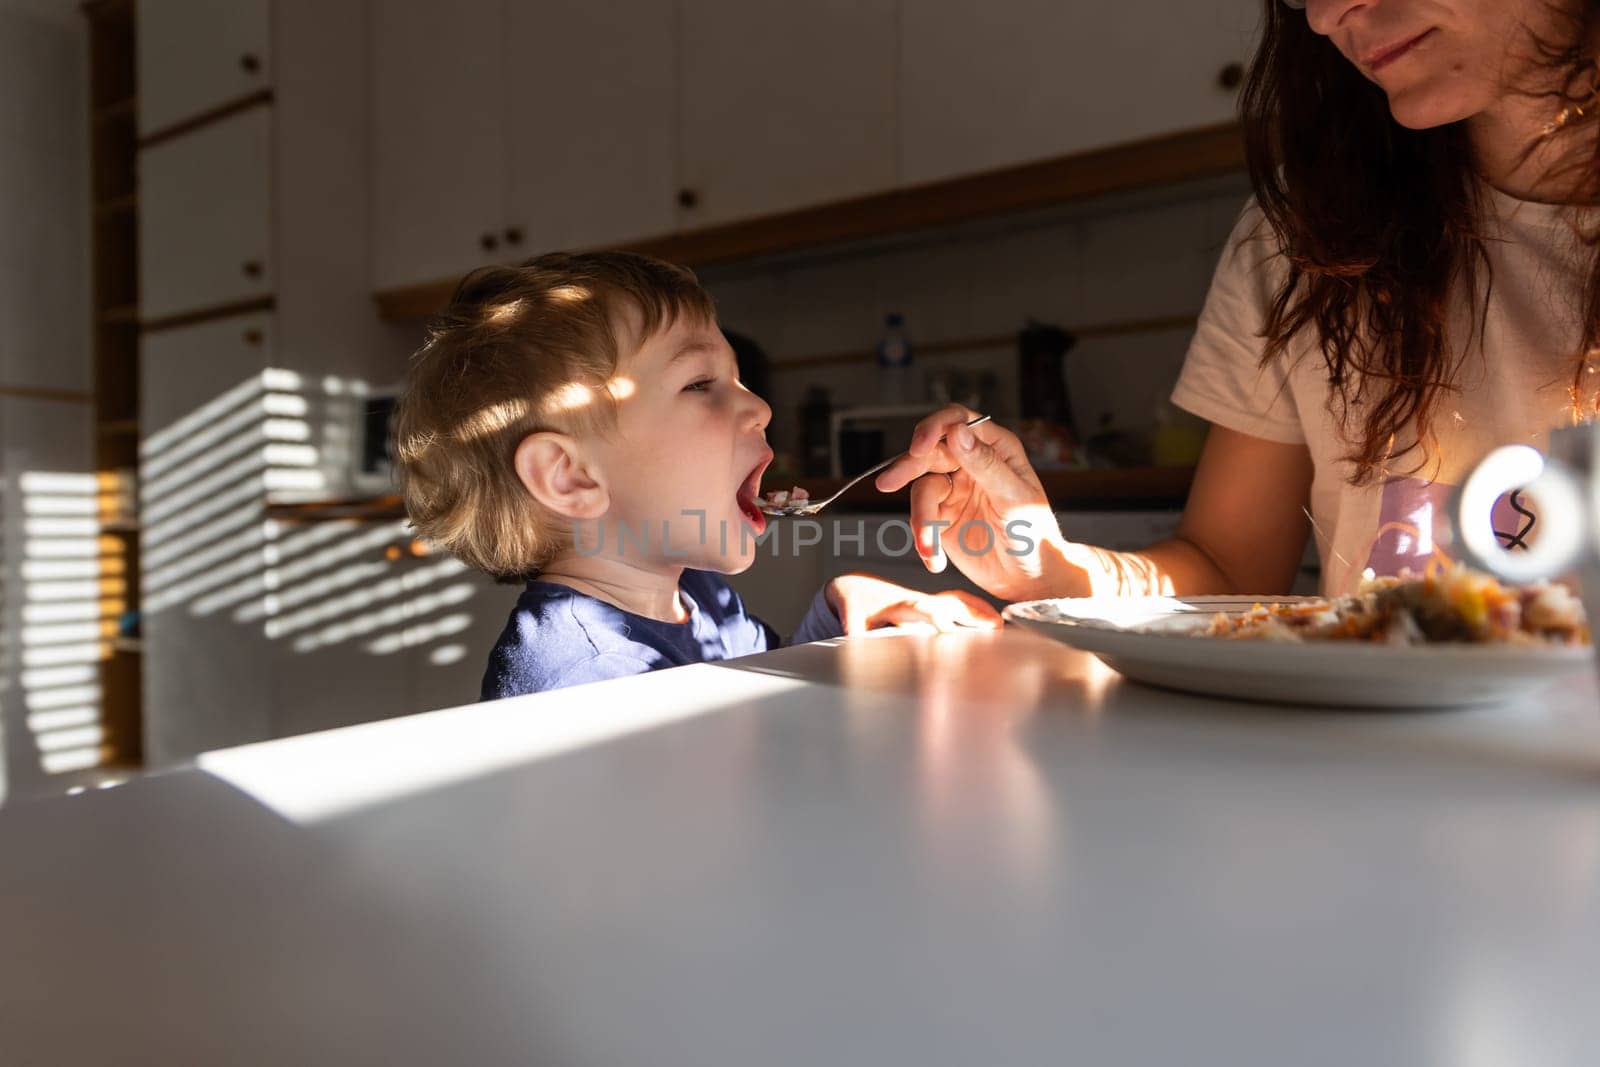 Mom feeds her little boy with a spoon in the kitchen. Mid shot